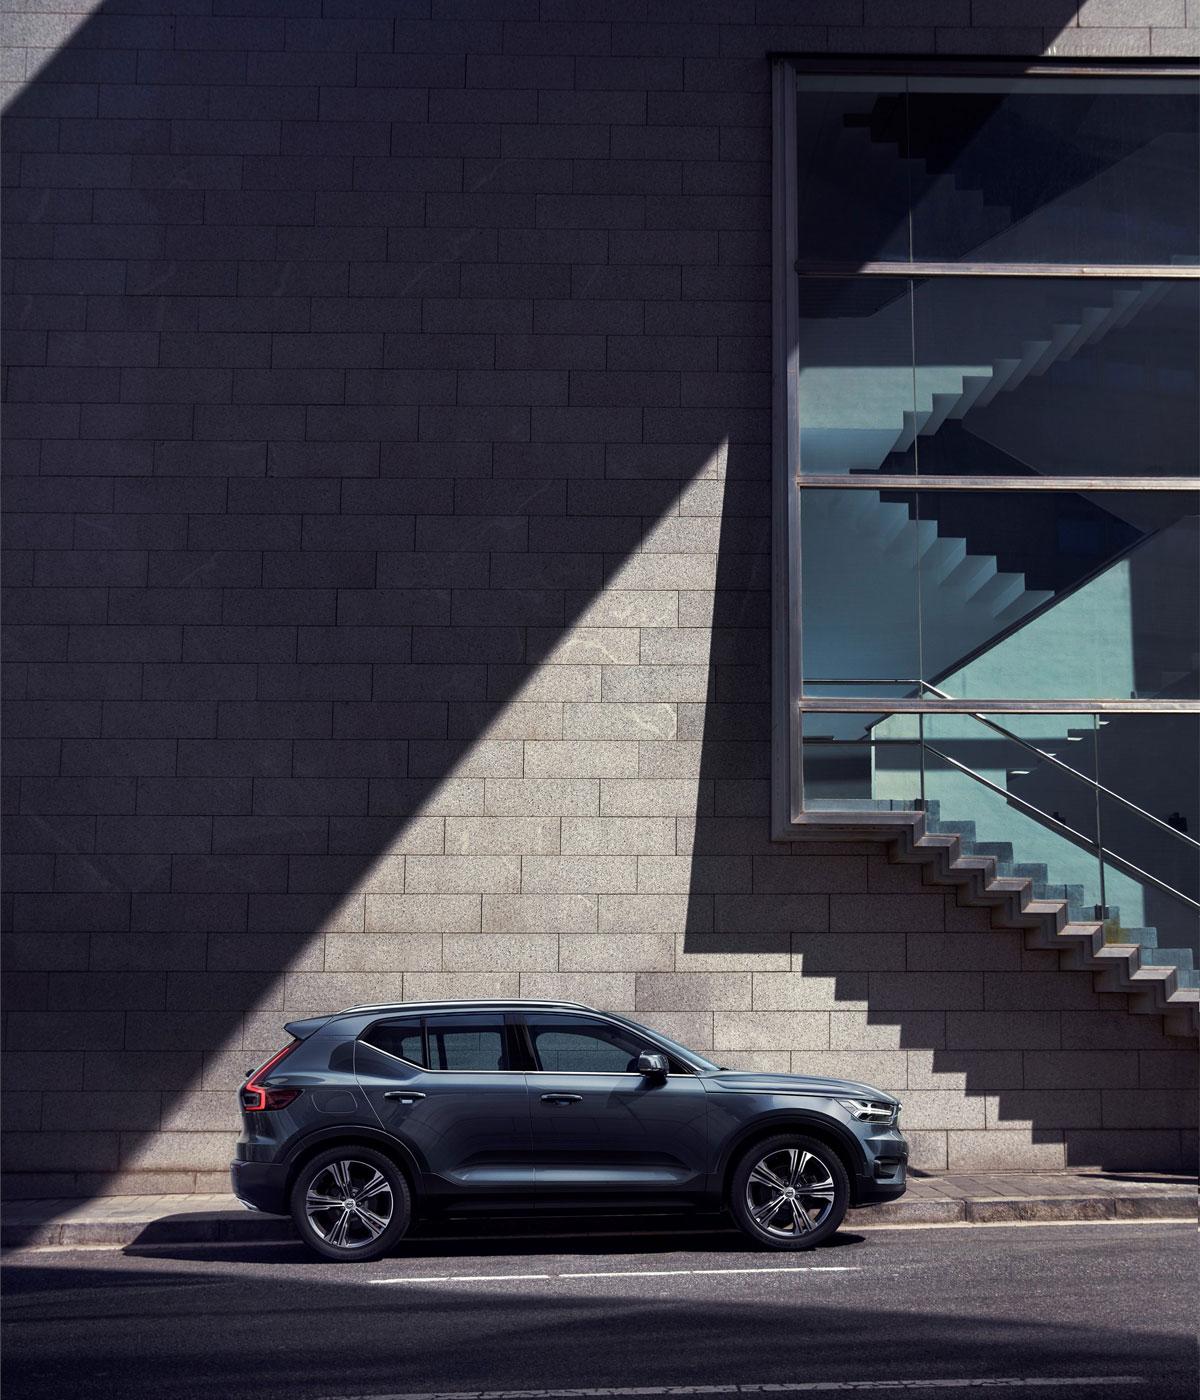 The new Volvo XC40 review and testdrive. Wallpaper*